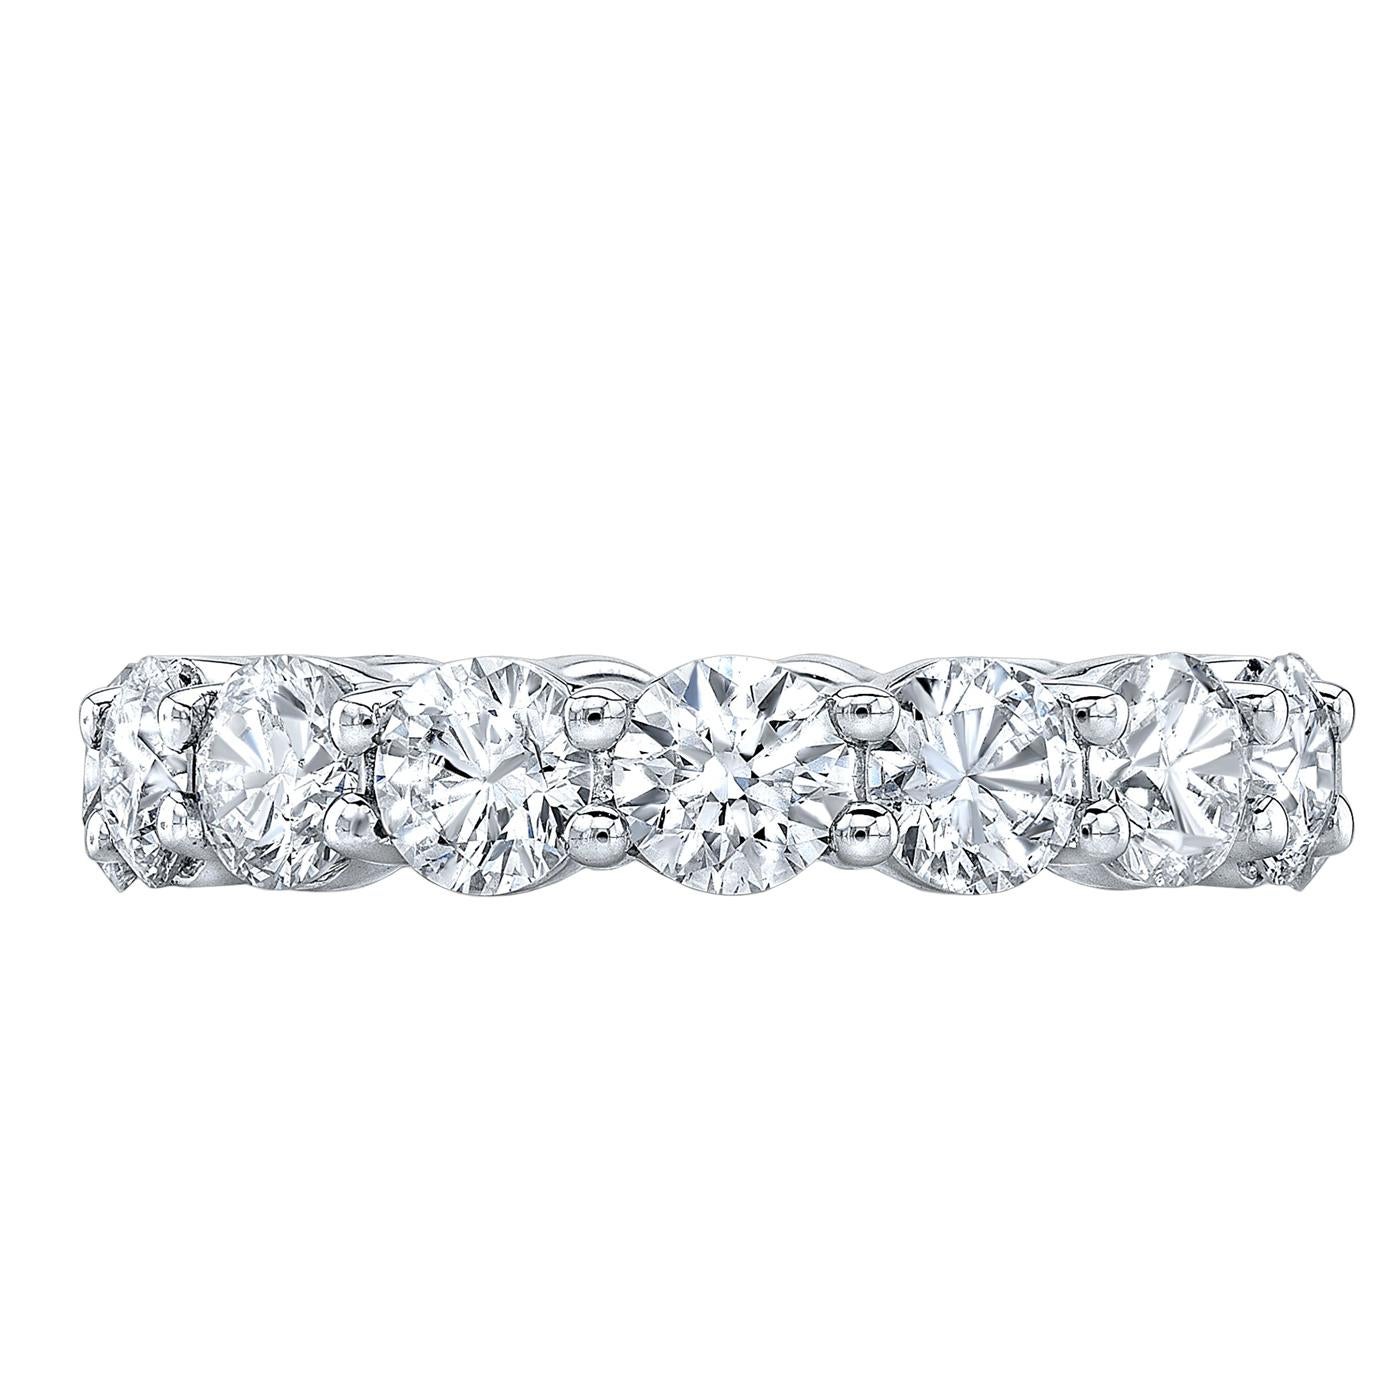 2.5 Carat platinum natural round diamond ring featuring 18 round diamonds in an eternity band. Stunning round diamonds stretch across the length of this incomparable women's eternity band. Fashioned in bold platinum, the total diamond weight of the